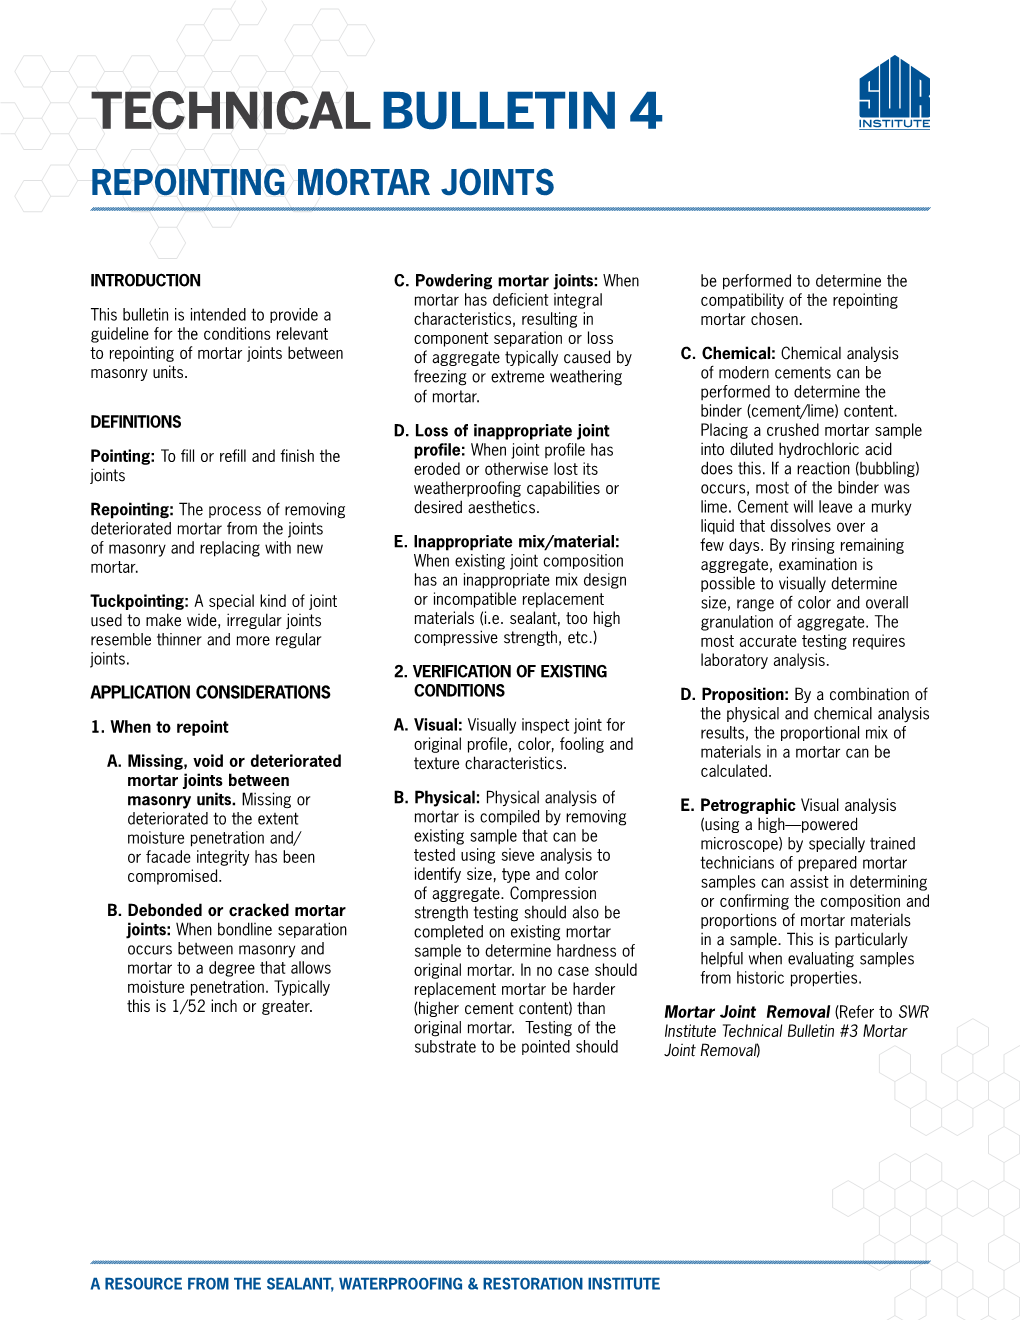 Technical Bulletin 4 Repointing Mortar Joints